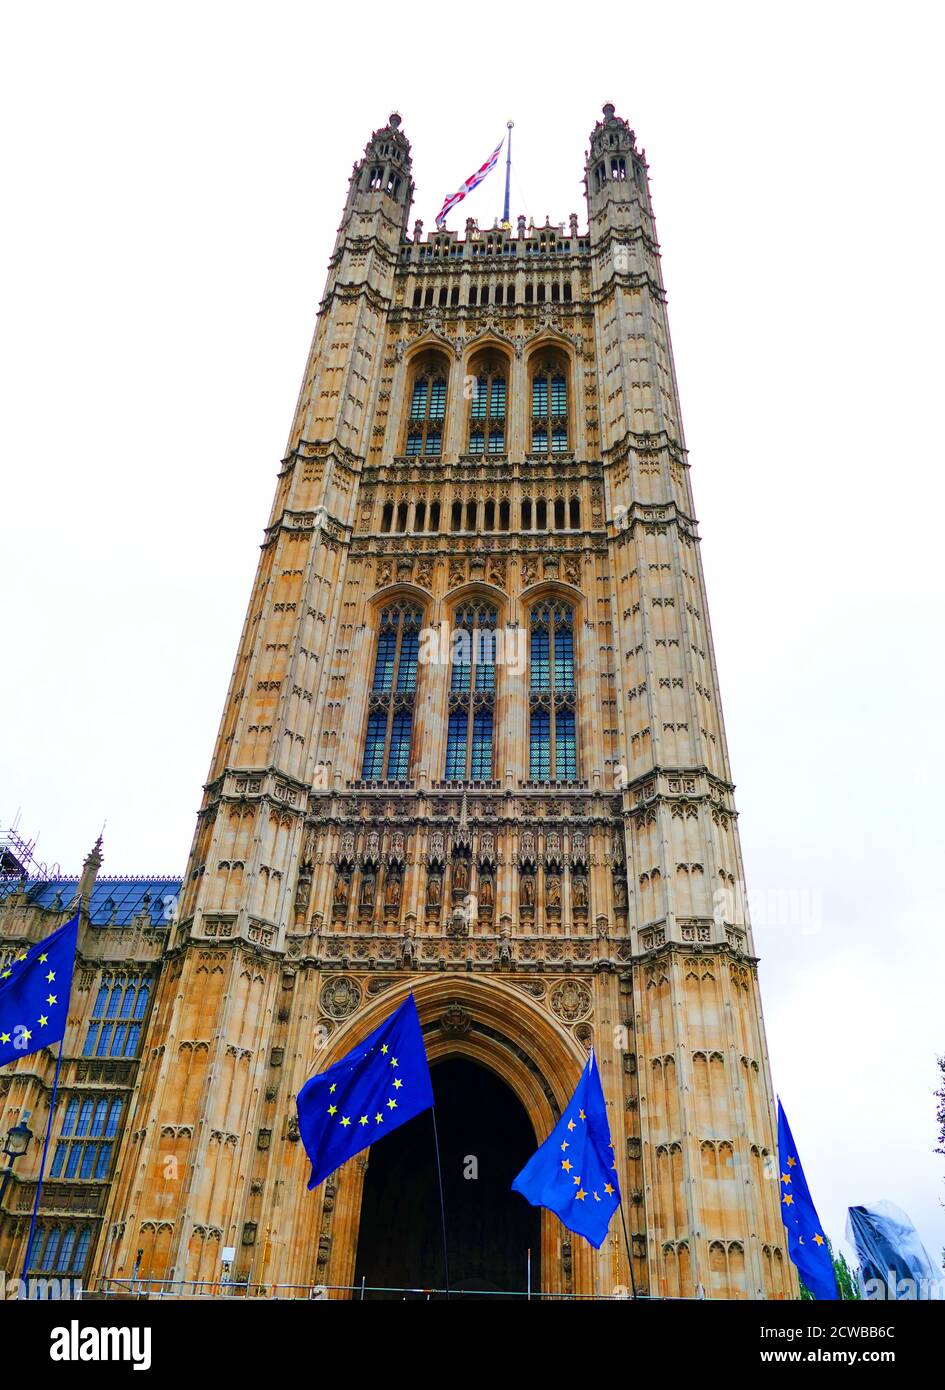 EU flags on display outside Parliament, London, September 2019. Brexit was the scheduled withdrawal of the United Kingdom (UK) from the European Union (EU). Following a June 2016 referendum, in which 51.9% of participating voters voted to leave, the UK government formally announced the country's withdrawal in March 2017, starting a two-year process that was due to conclude with the UK withdrawing on 29 March 2019. As the UK parliament thrice voted against the negotiated withdrawal agreement, that deadline has been extended twice, and is currently 31 October 2019. Stock Photo